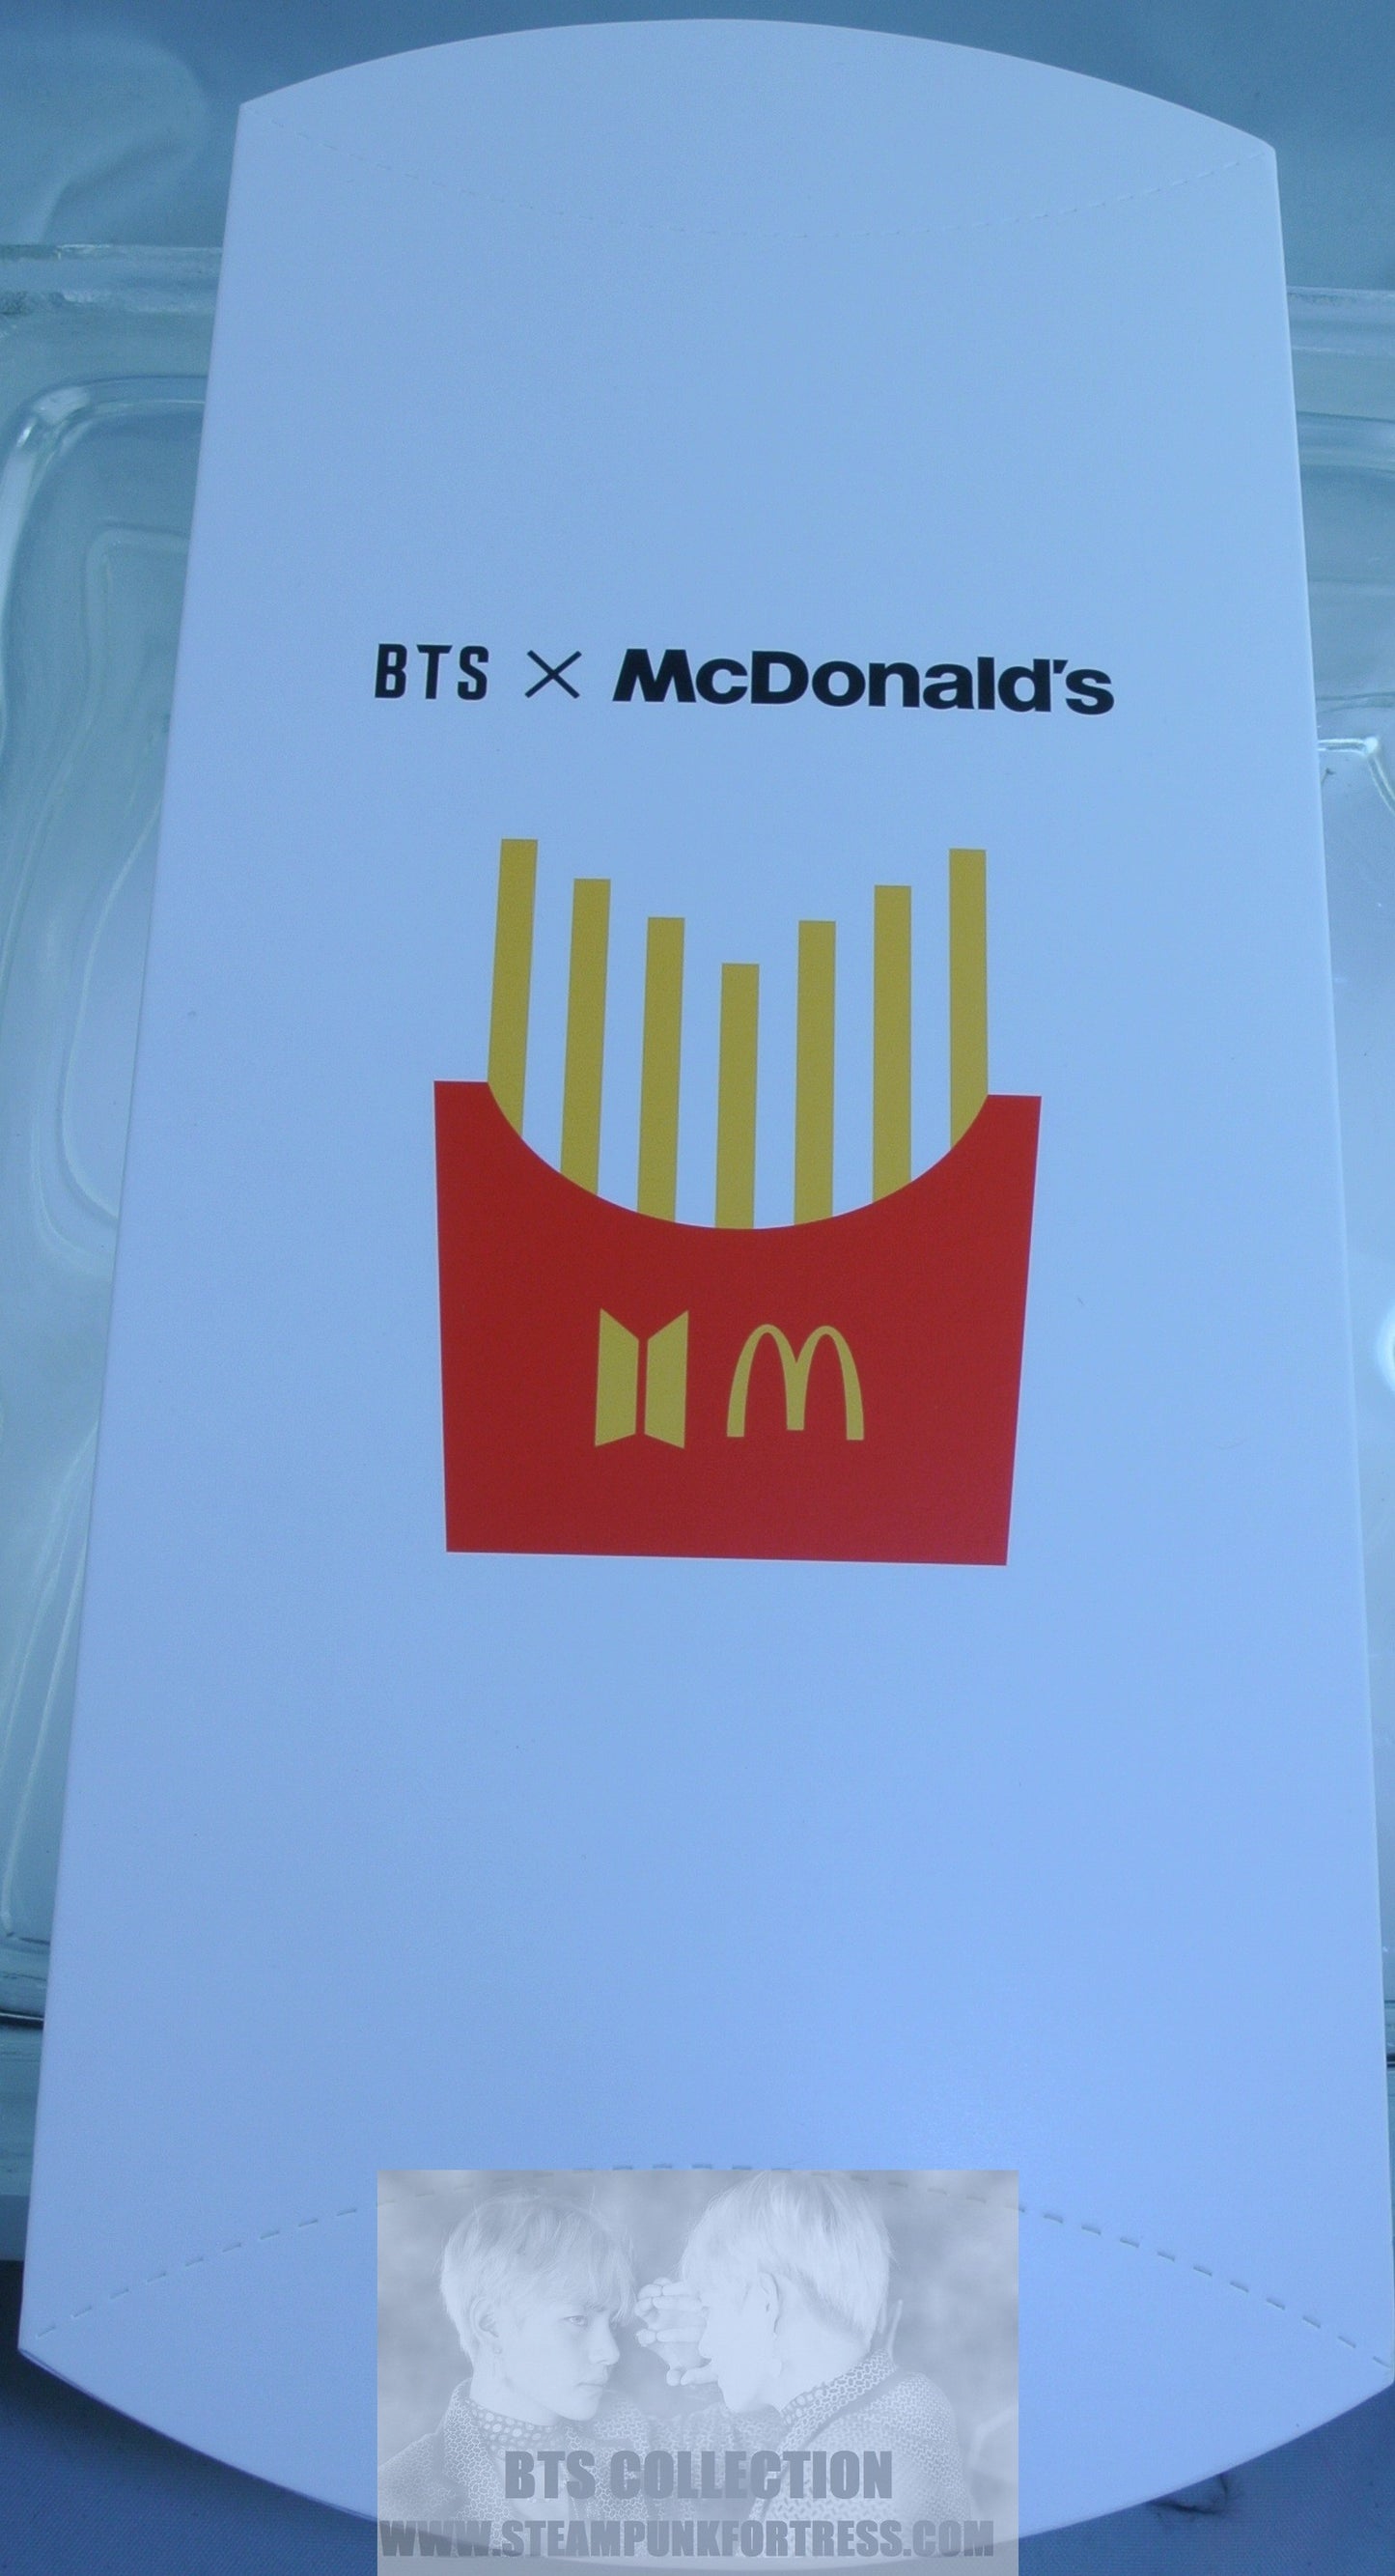 BTS MCDONALDS 7 FRENCH FRY EMPTY PACKAGE FOLDING BOX (LIKE APPLE PIE CONTAINER) FROM SOCKS NEW OFFICIAL MERCHANDISE